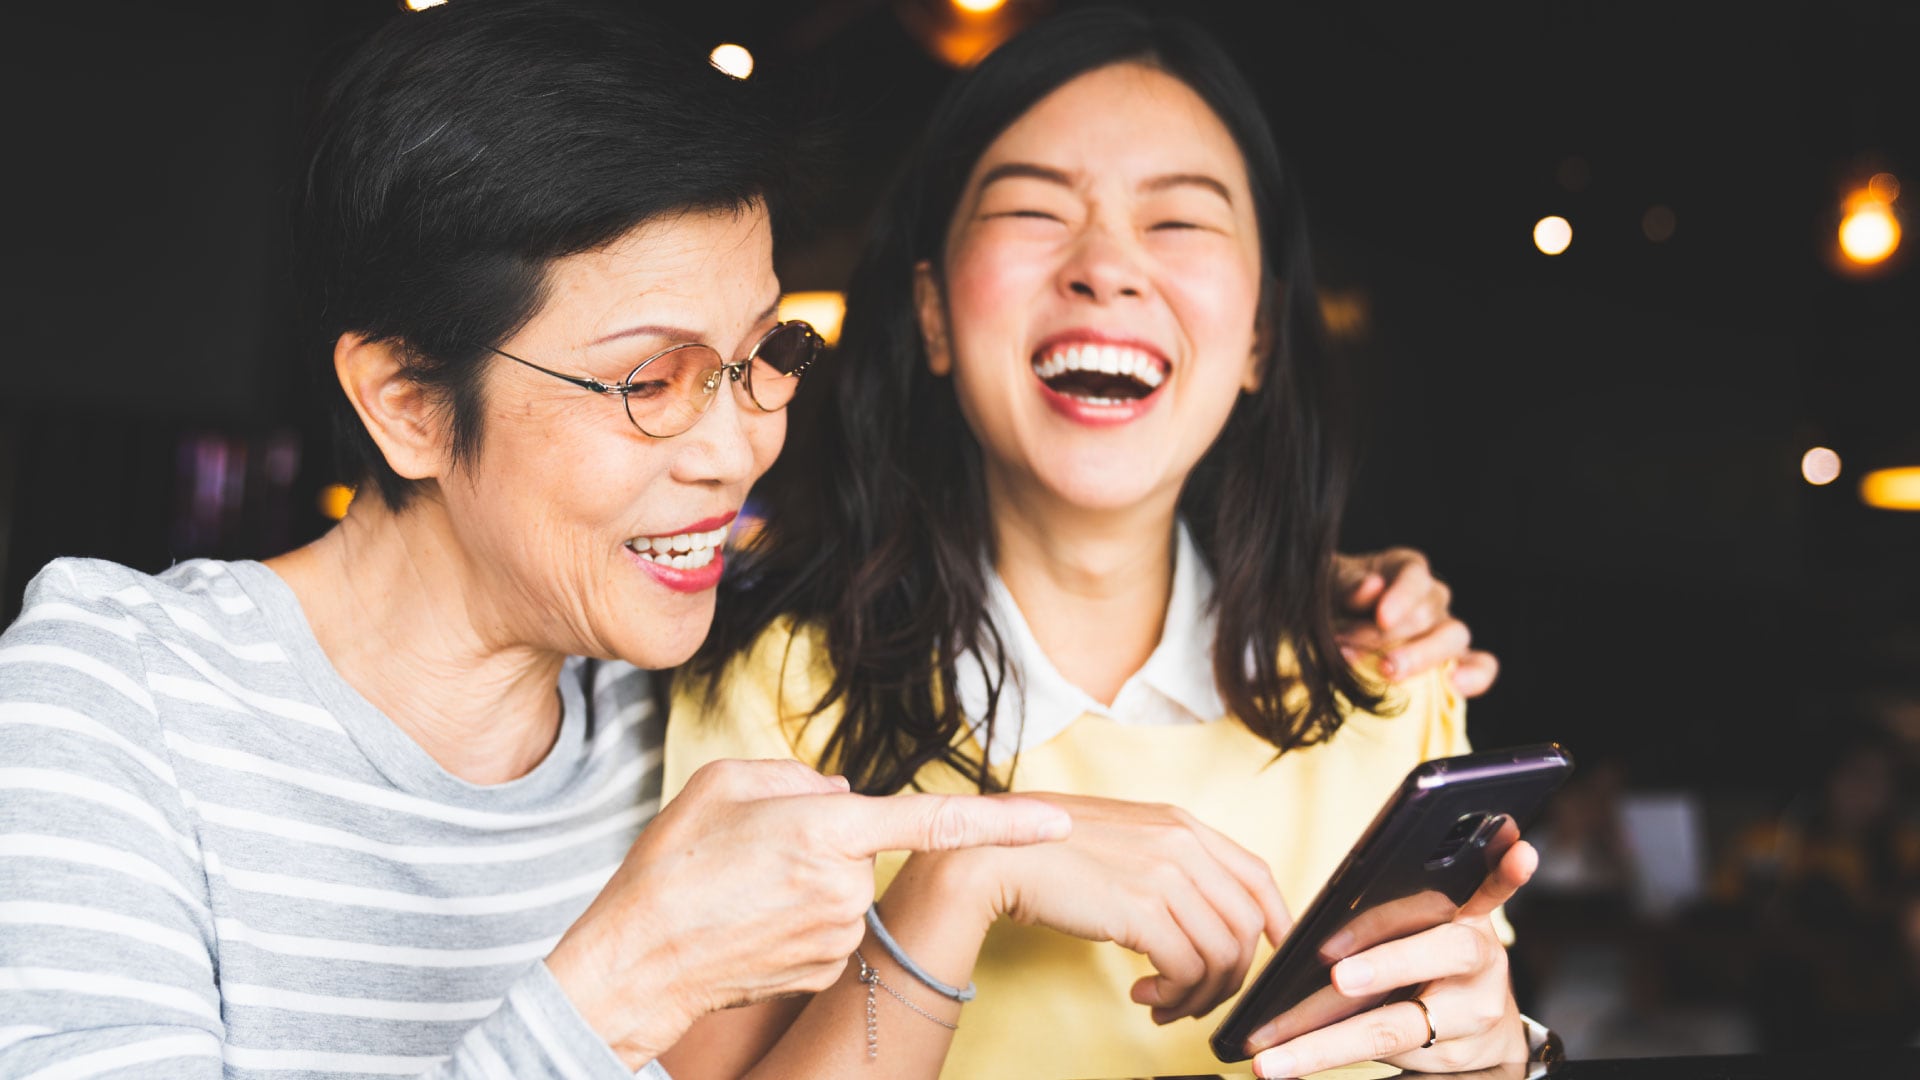 two women using a smart phone and smiling